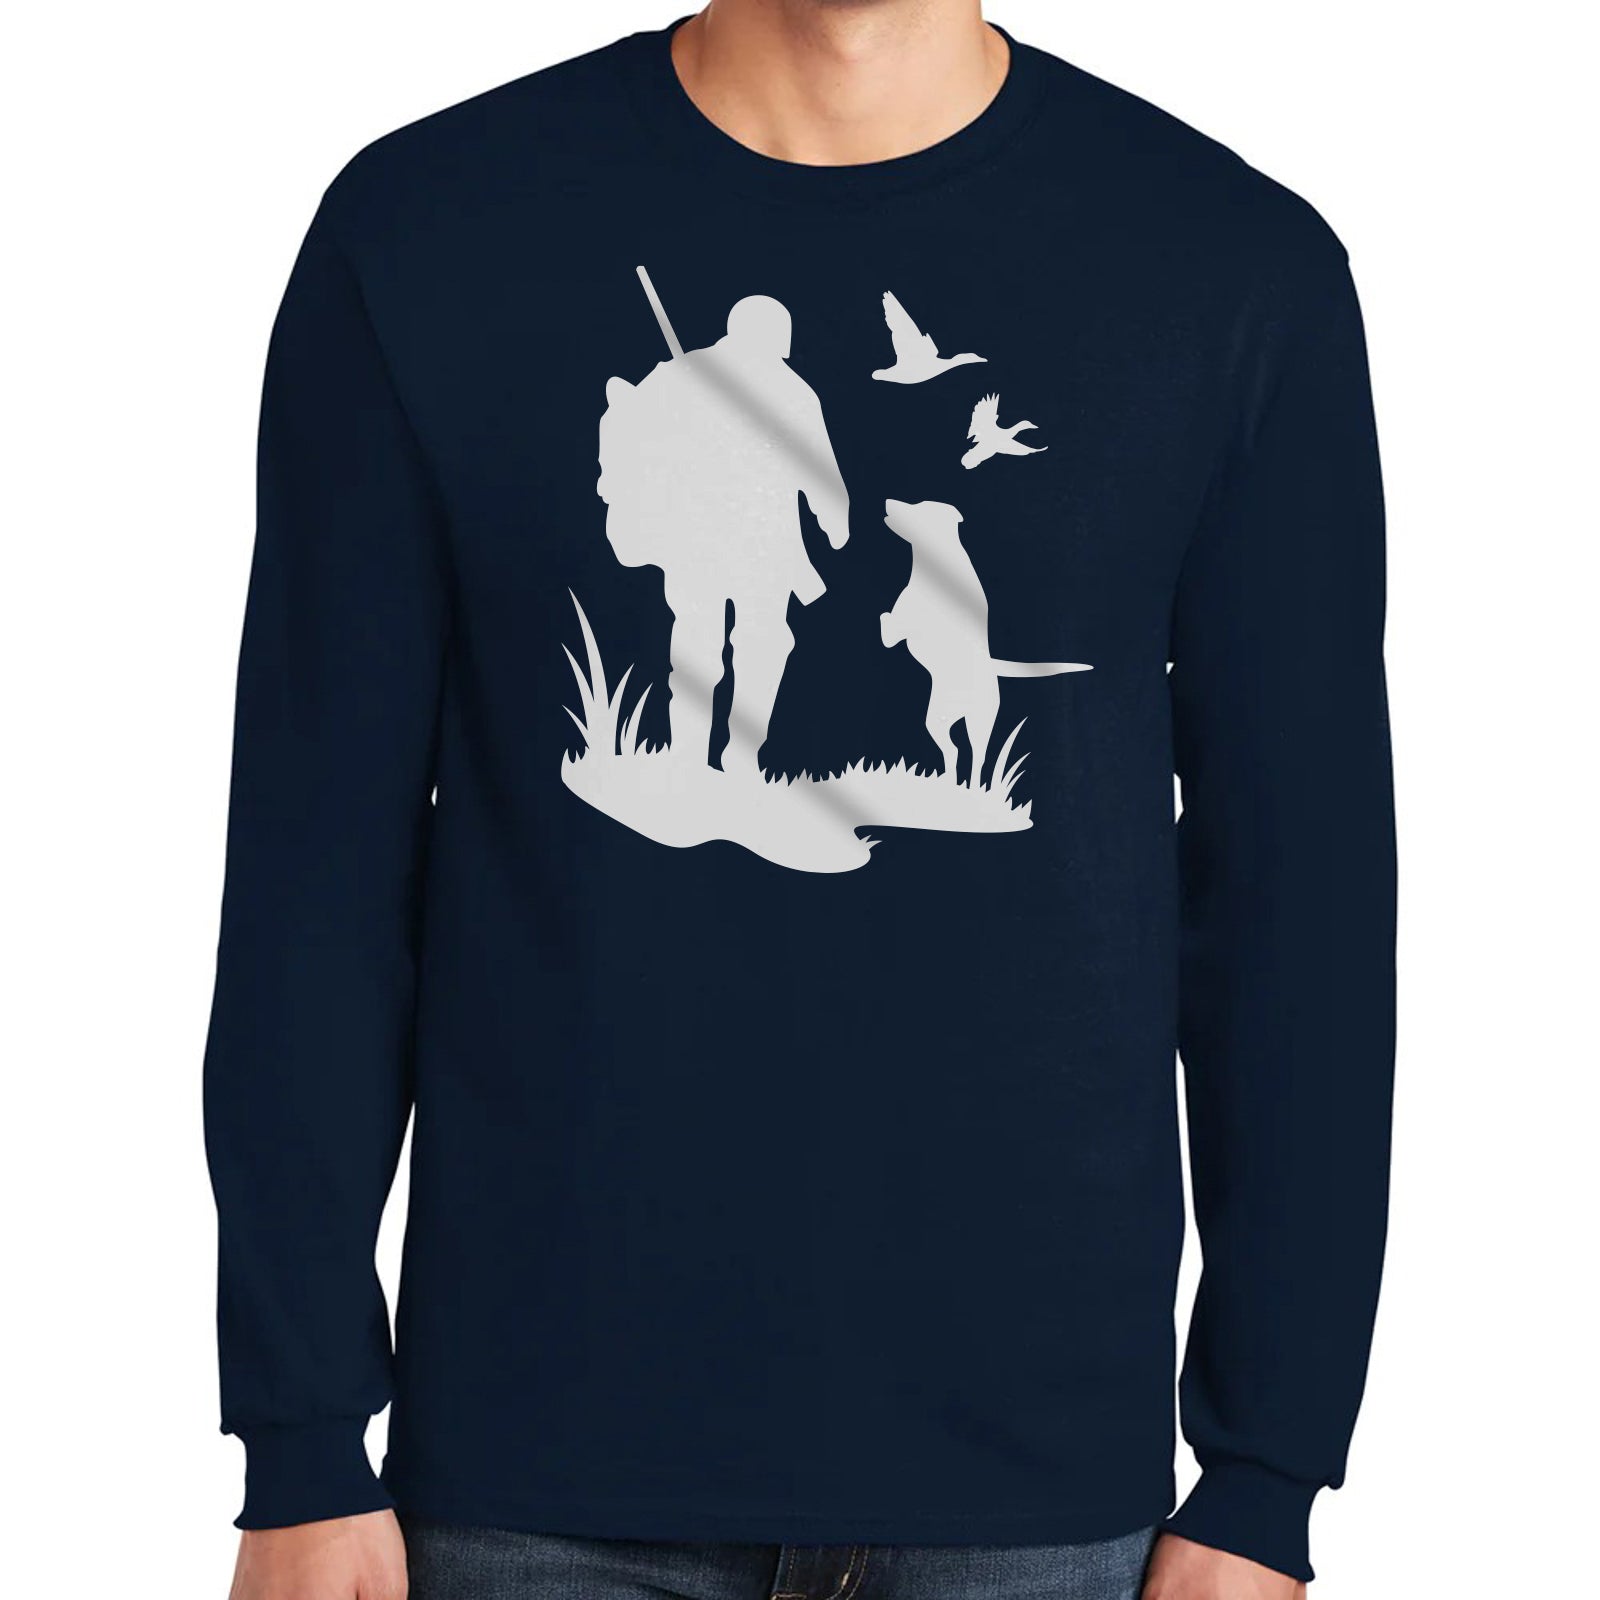 Hunting with Dog Graphic Design Men's Big Size Ultra Cotton Long Sleeve T-Shirt, Navy / 2XL